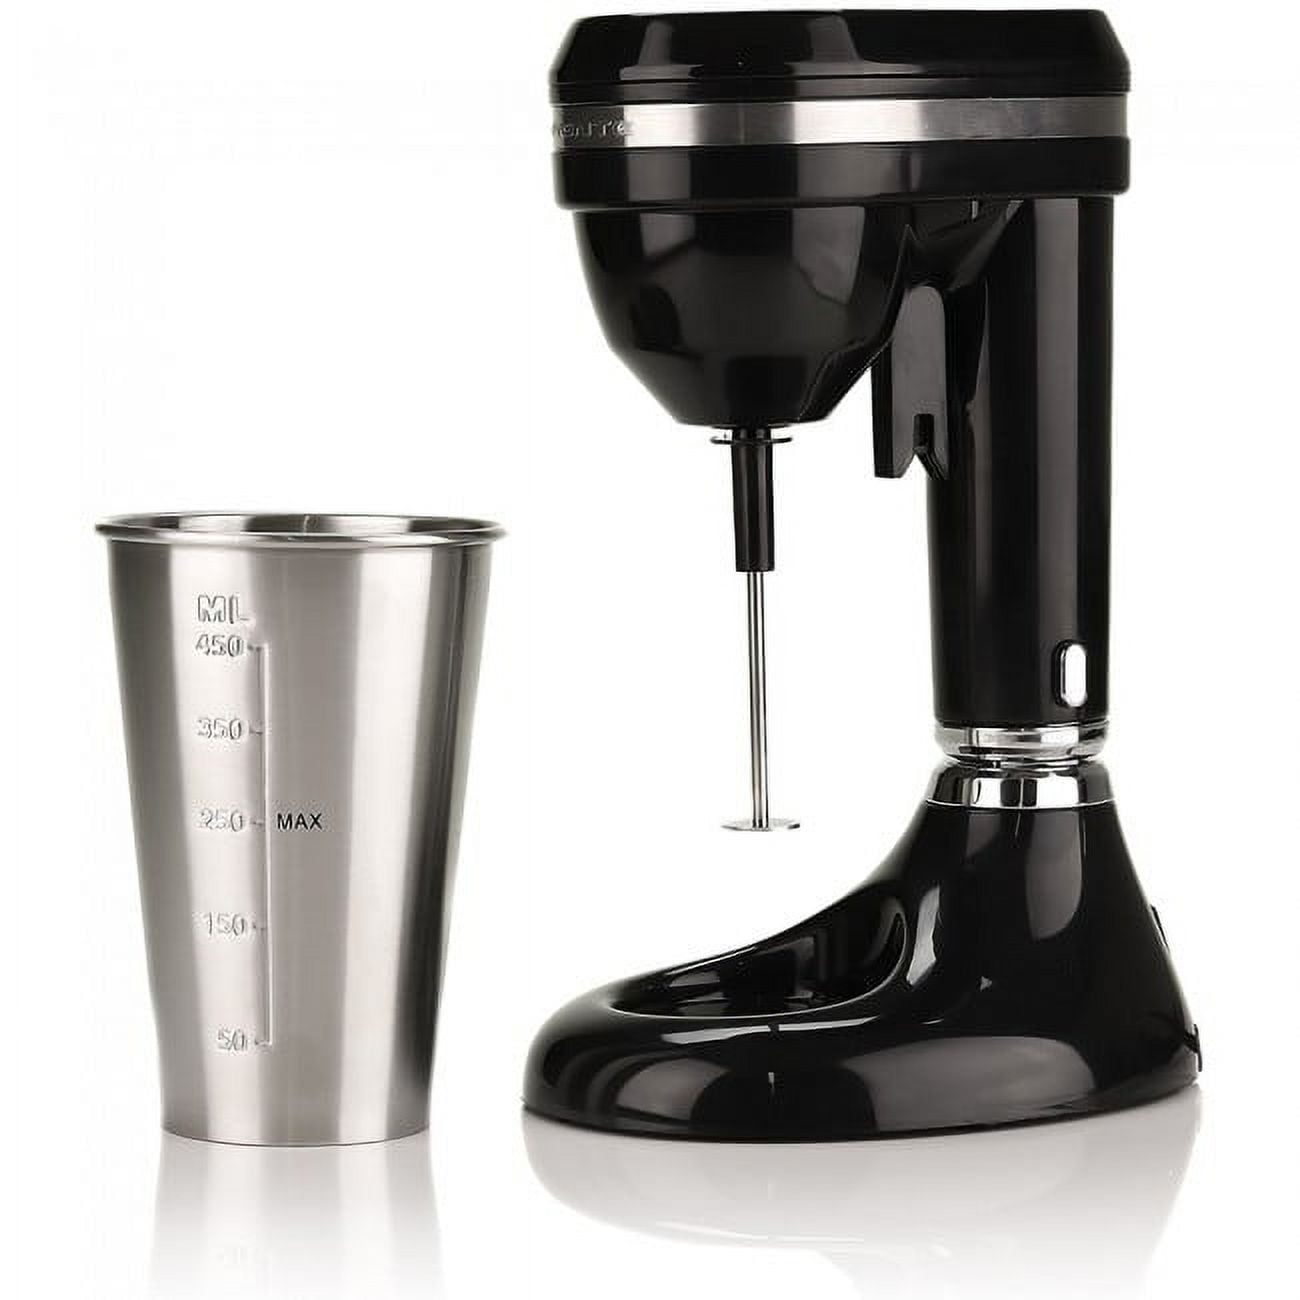 Ovente Classic Milkshake Maker Machine 2 Speed with 15.2 oz Stainless Steel Mixing Cup Drink Mixer Blender, Black MS2070B